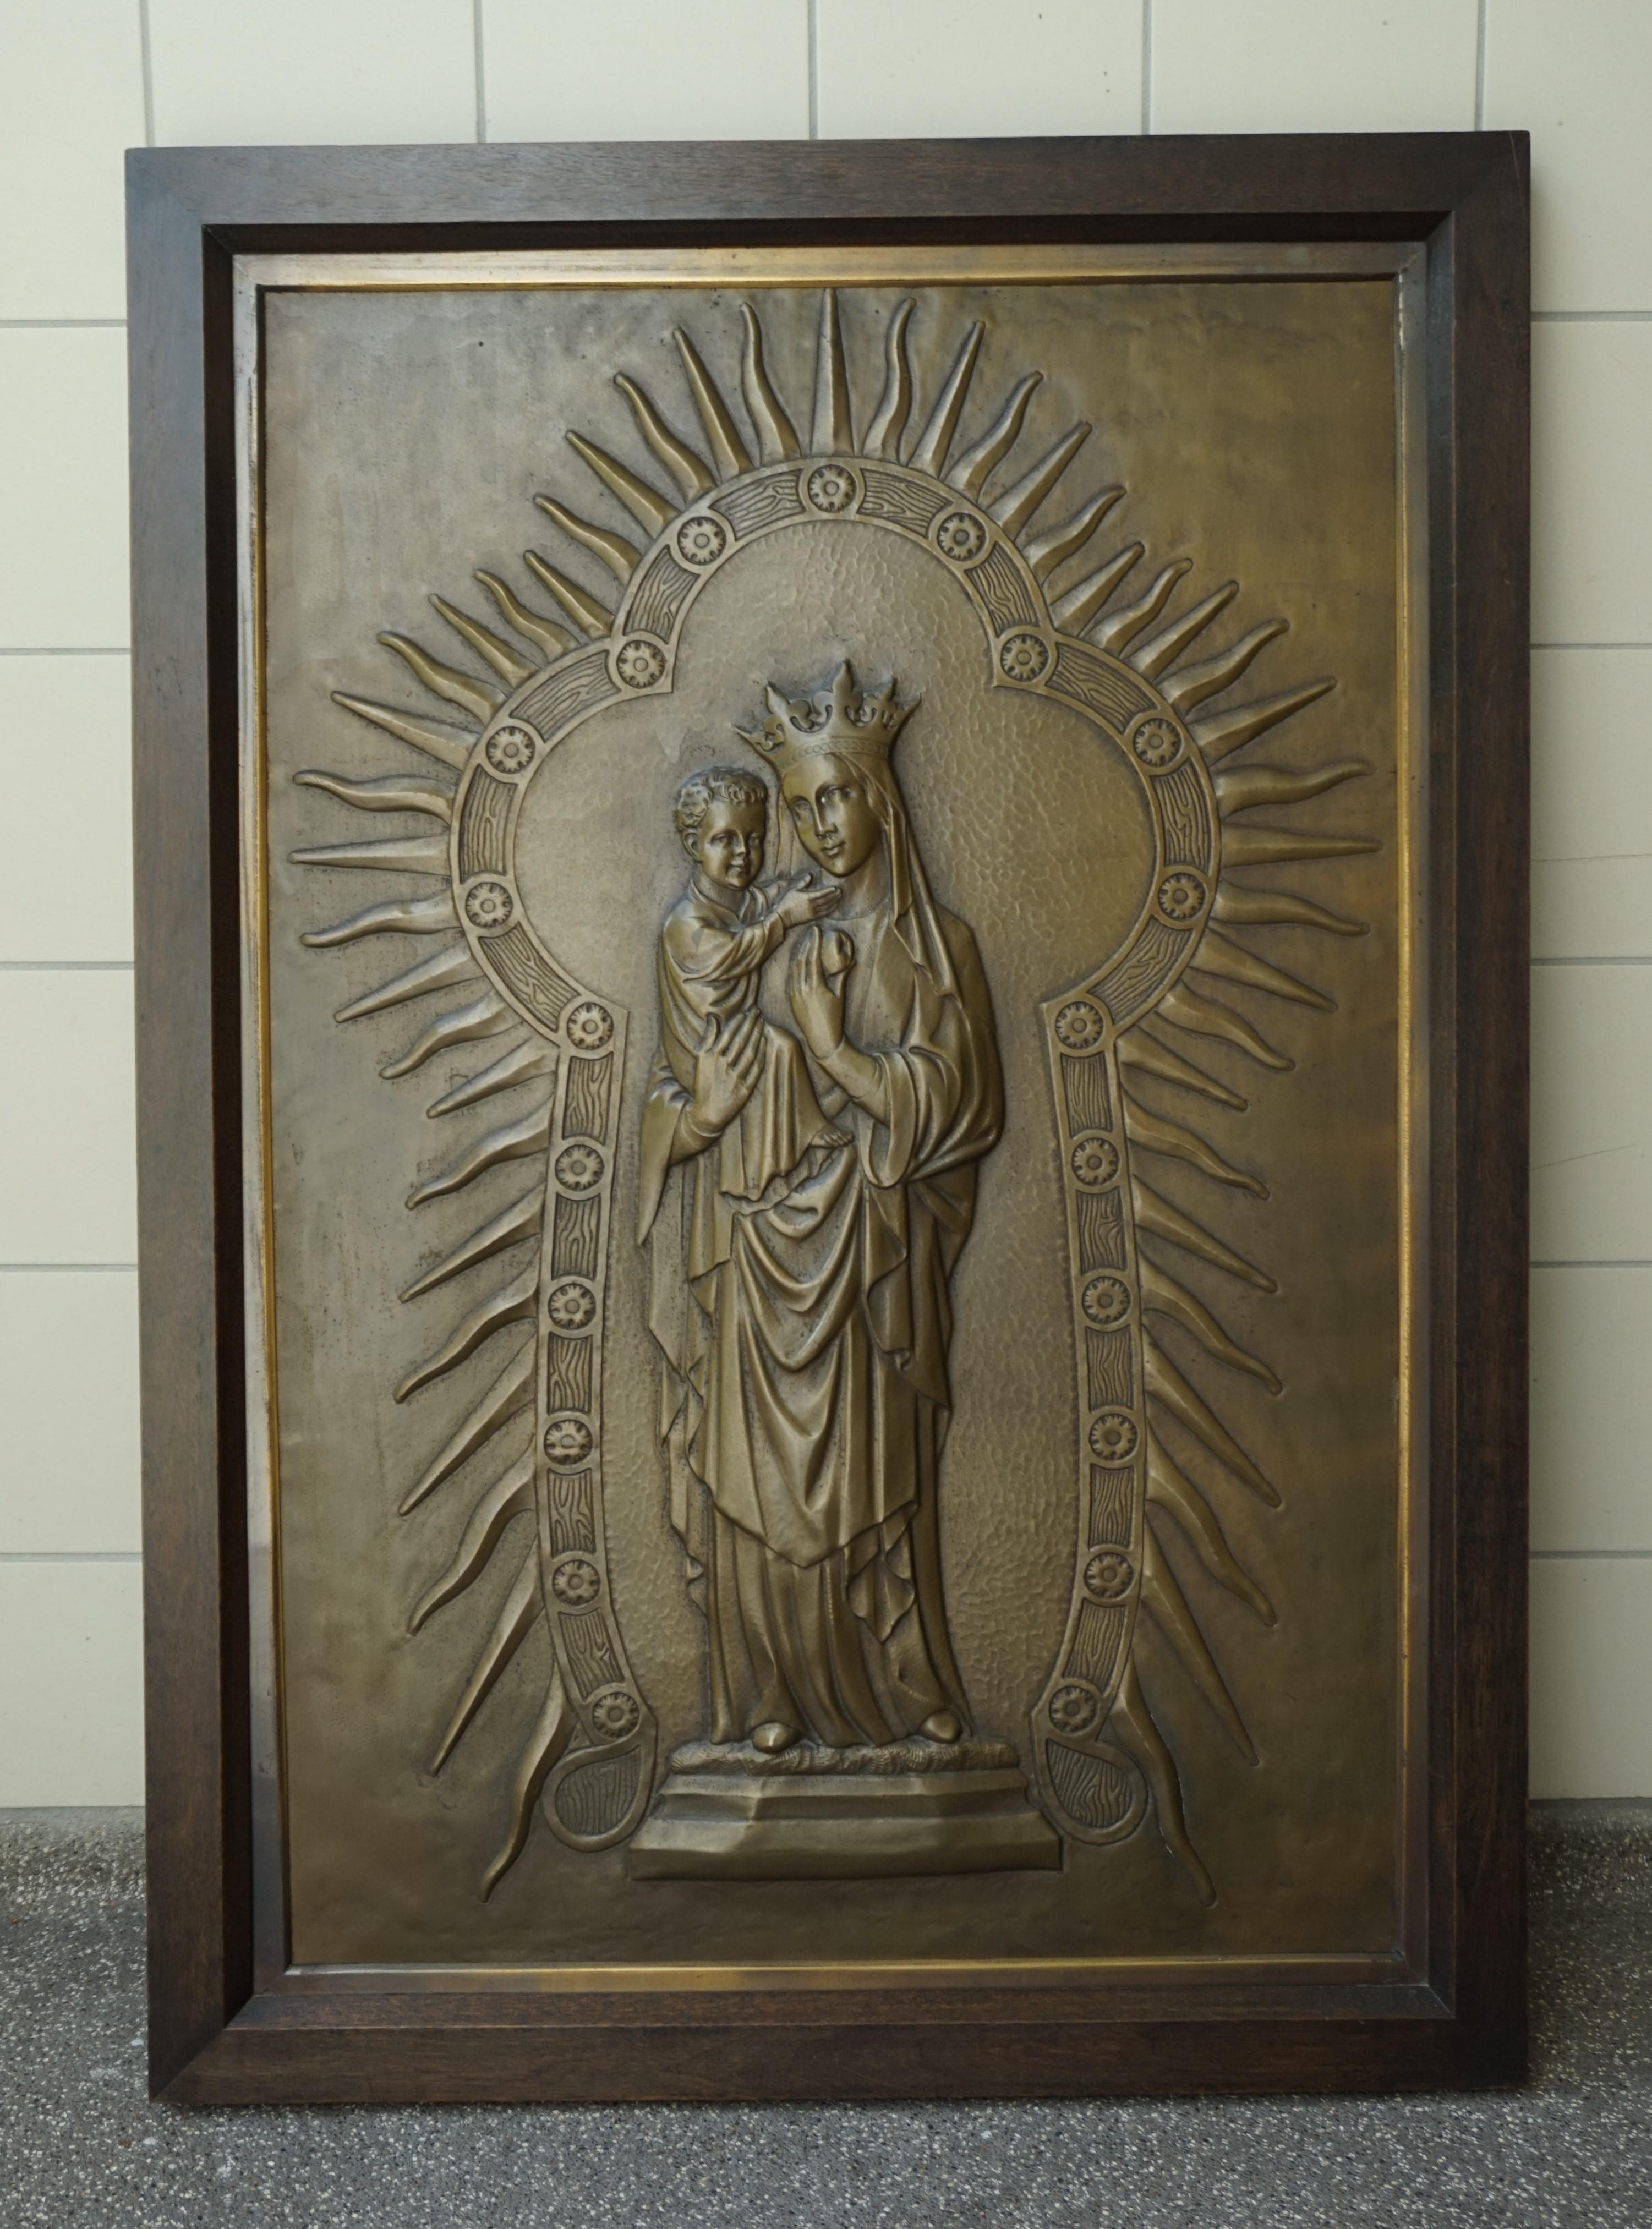 Antique Mary and Child Jesus Gothic Revival Brass Church Wall Plaque / Sculpture 10